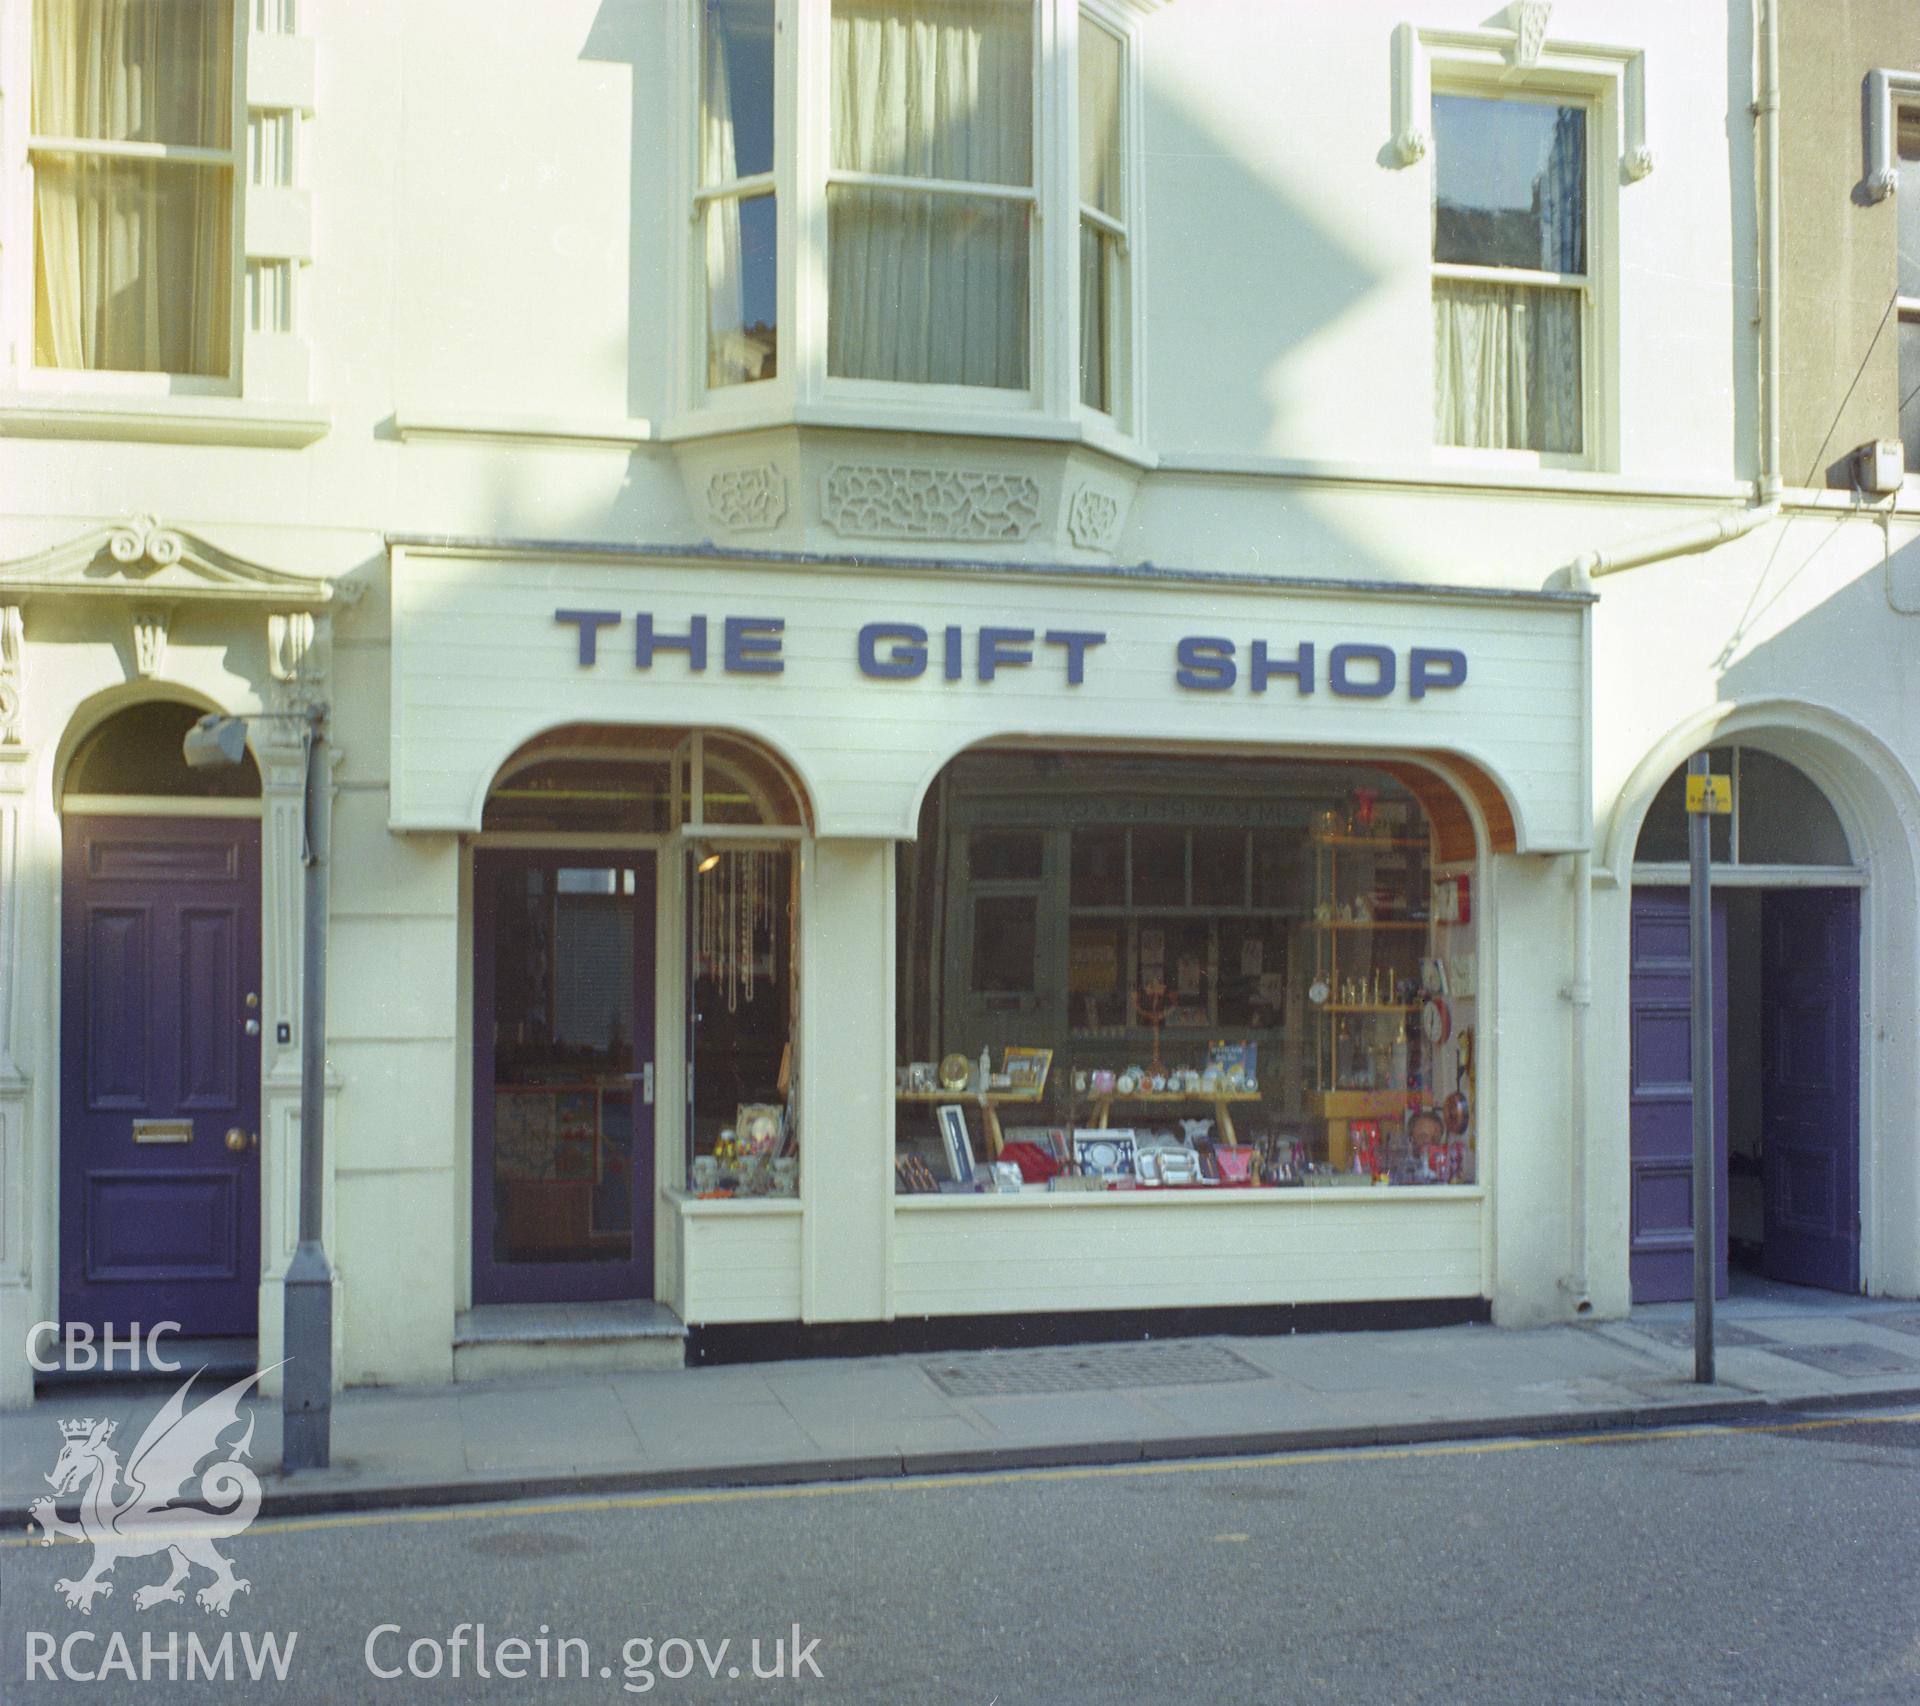 Exterior view showing shop front - The Gift Shop.